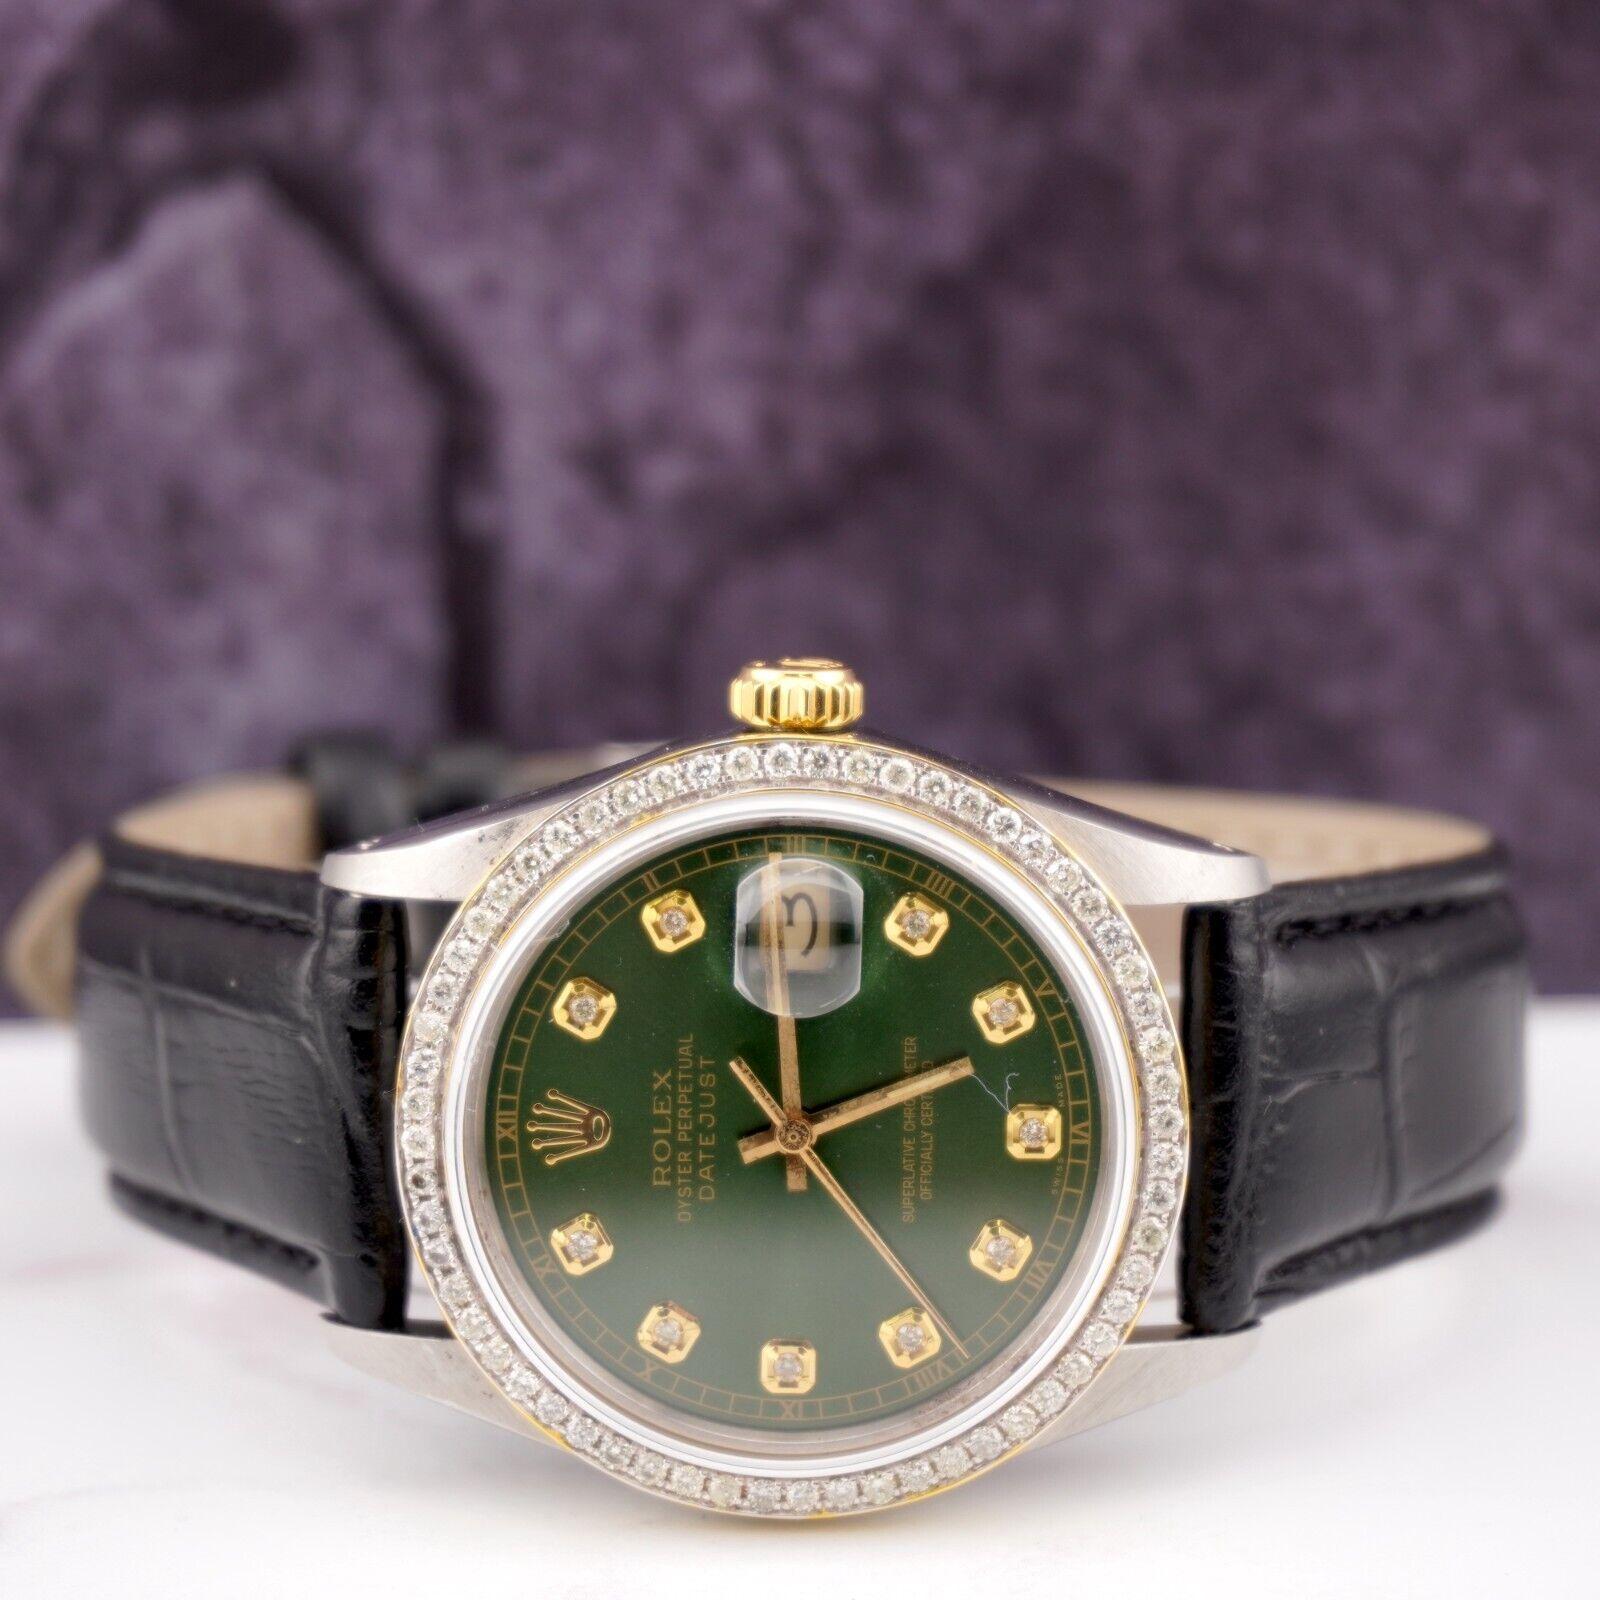 Rolex Datejust 36mm Watch. A Pre-owned watch w/ Gift Box. Watch is 100% Authentic and Comes with Authenticity Card. Watch Reference is 16013 and is in Excellent Condition (See Pictures). The dial color is Green (Have More Colors) and material is 18k